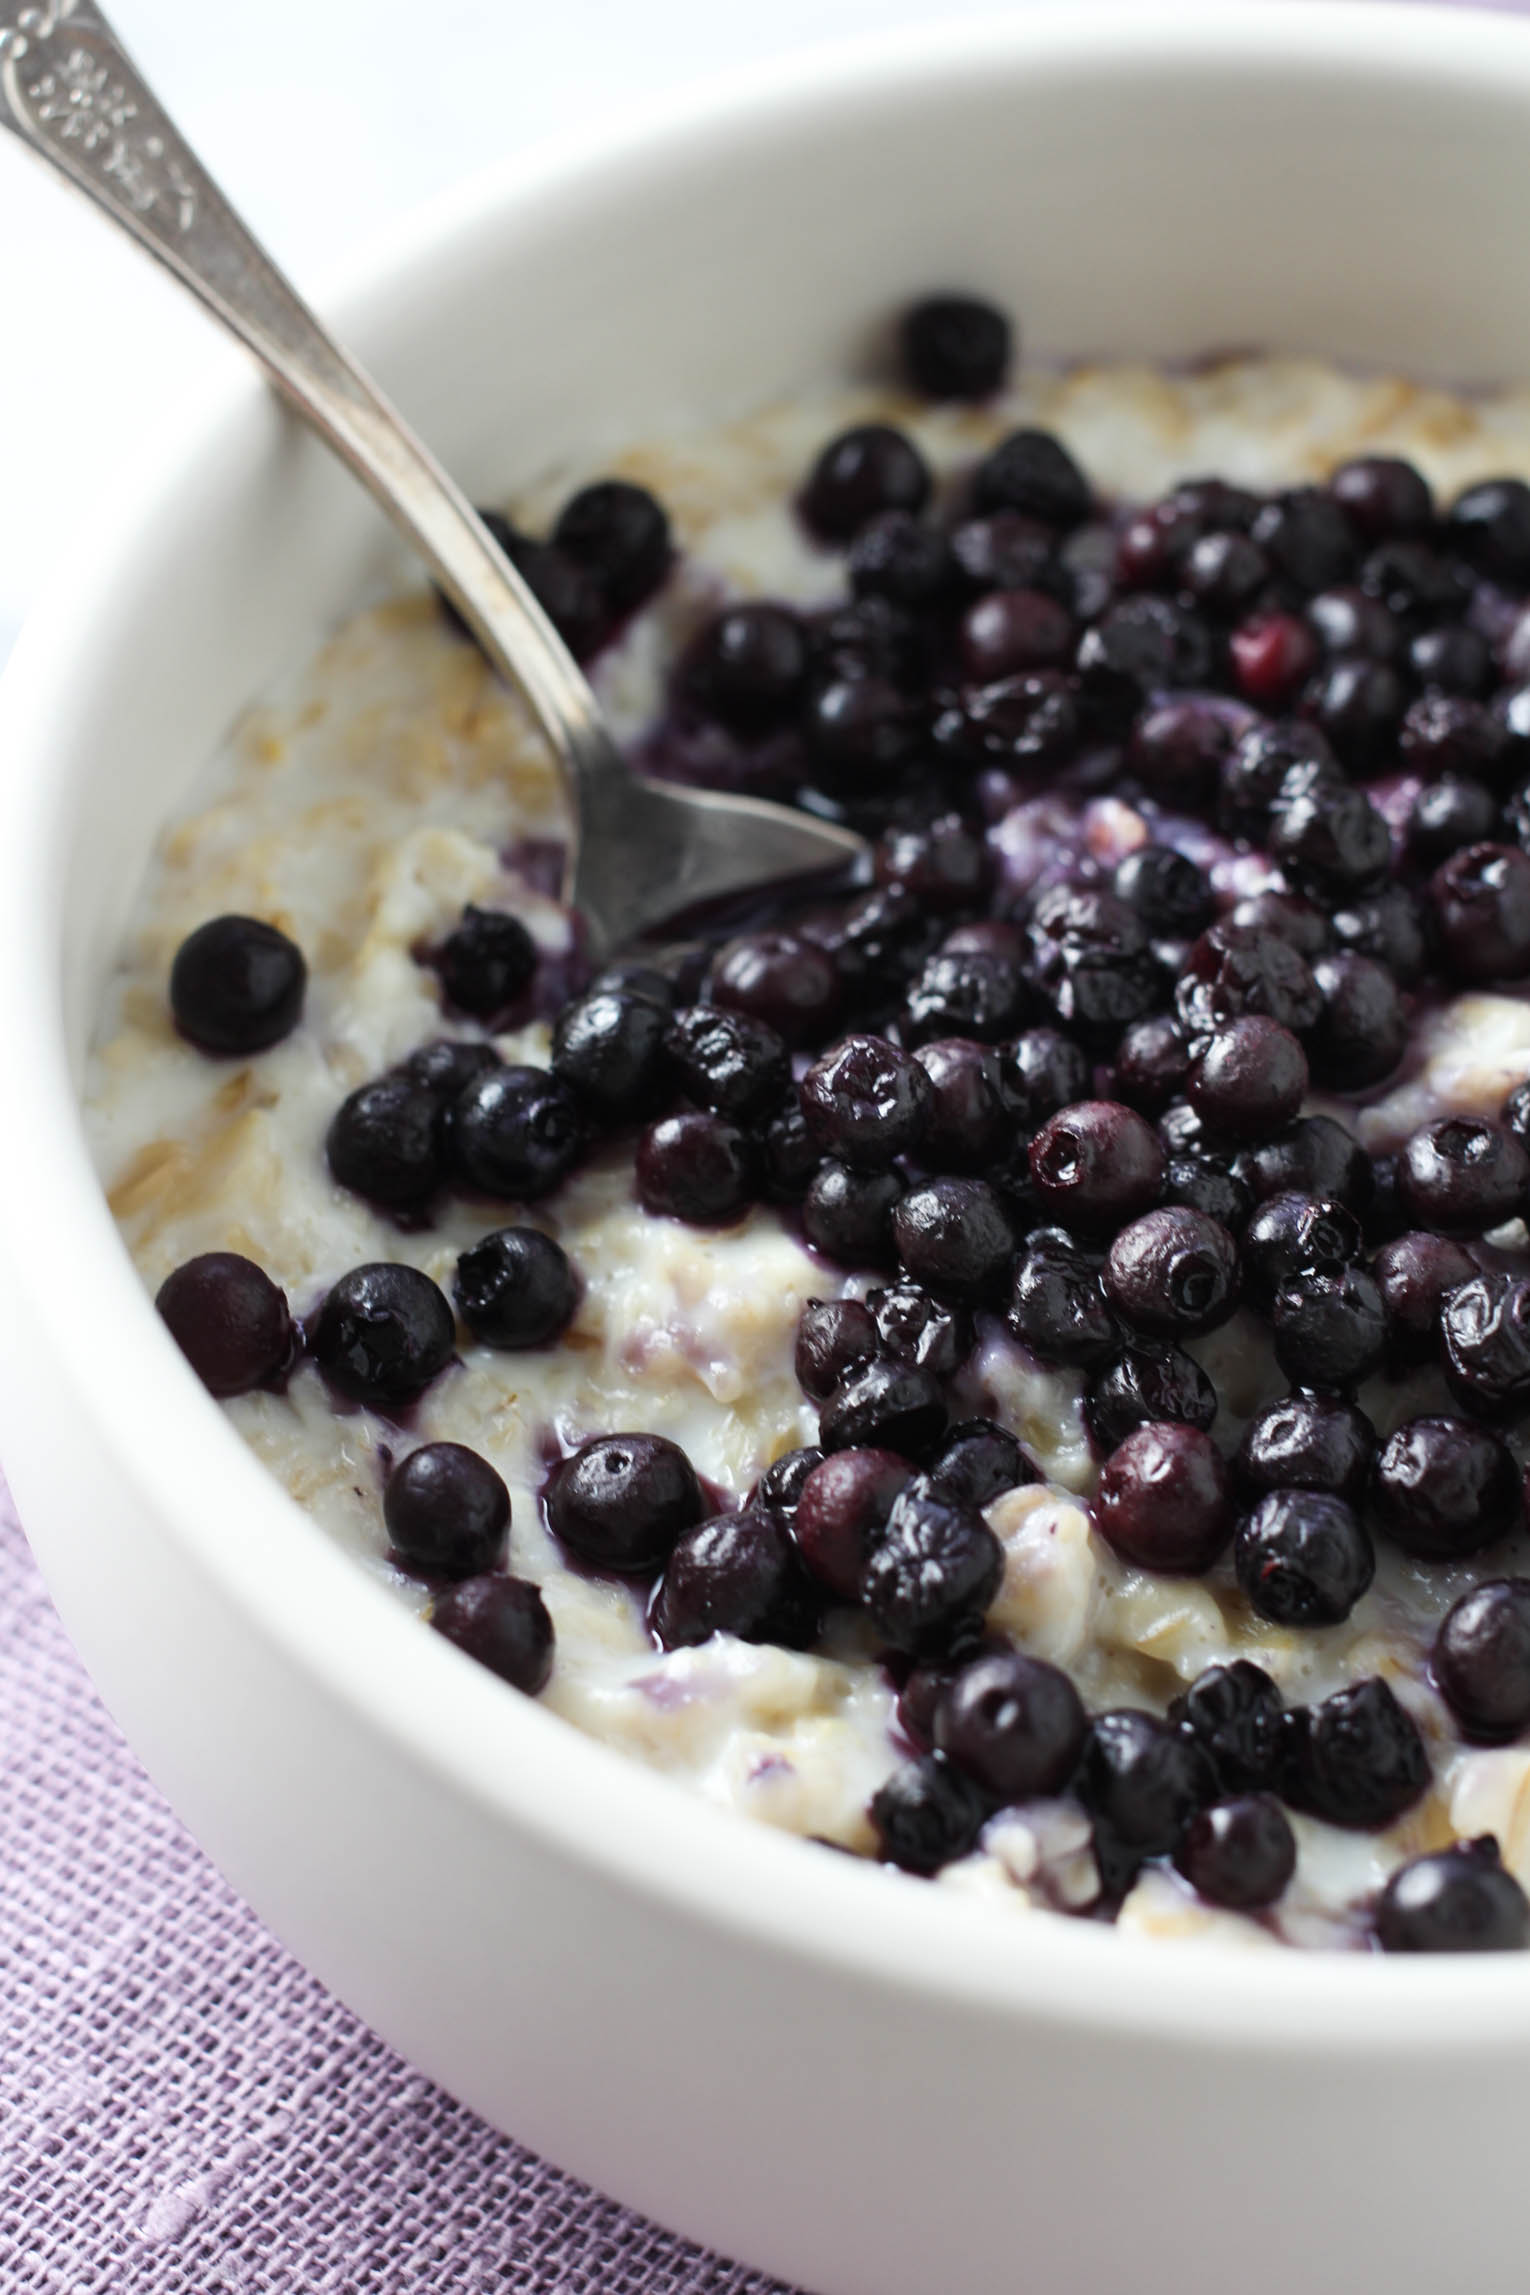 Oatmeal topped with blueberries in a bowl.